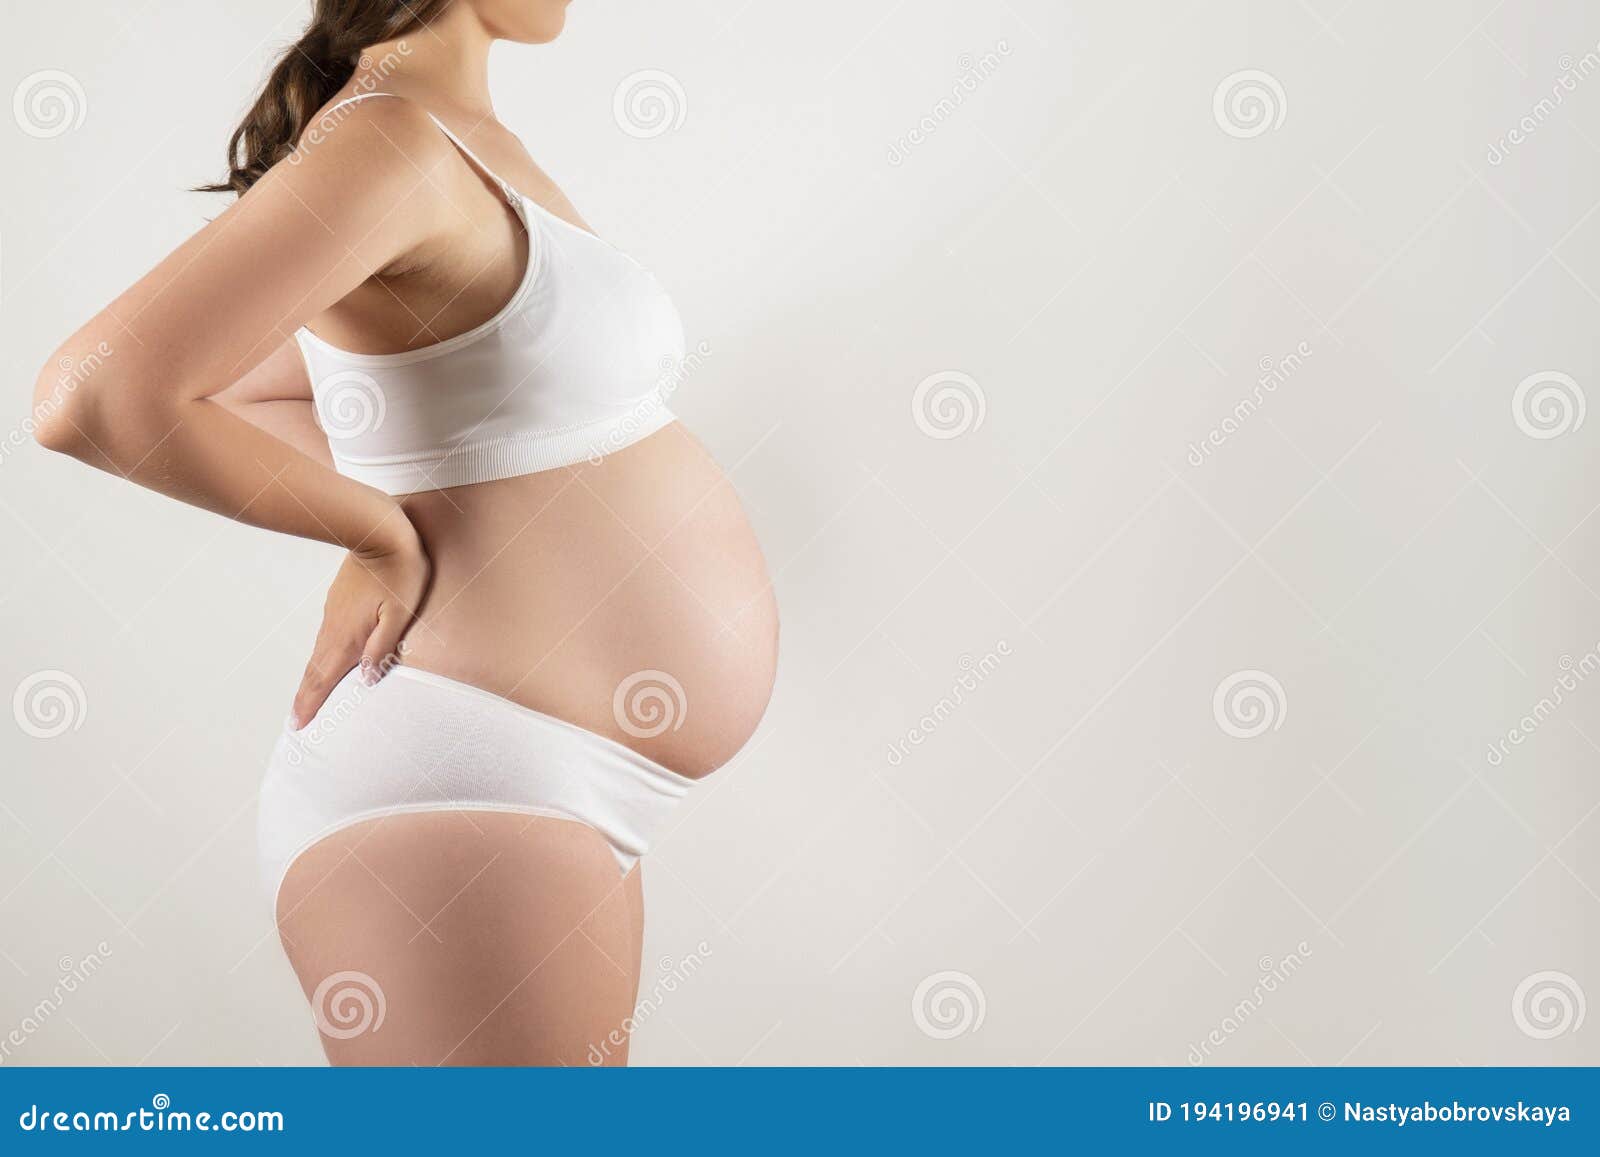 https://thumbs.dreamstime.com/z/close-up-pregnant-woman-wearing-supportive-seamless-maternity-bra-maxi-bottoms-female-hands-wrapped-around-big-bare-tummy-194196941.jpg